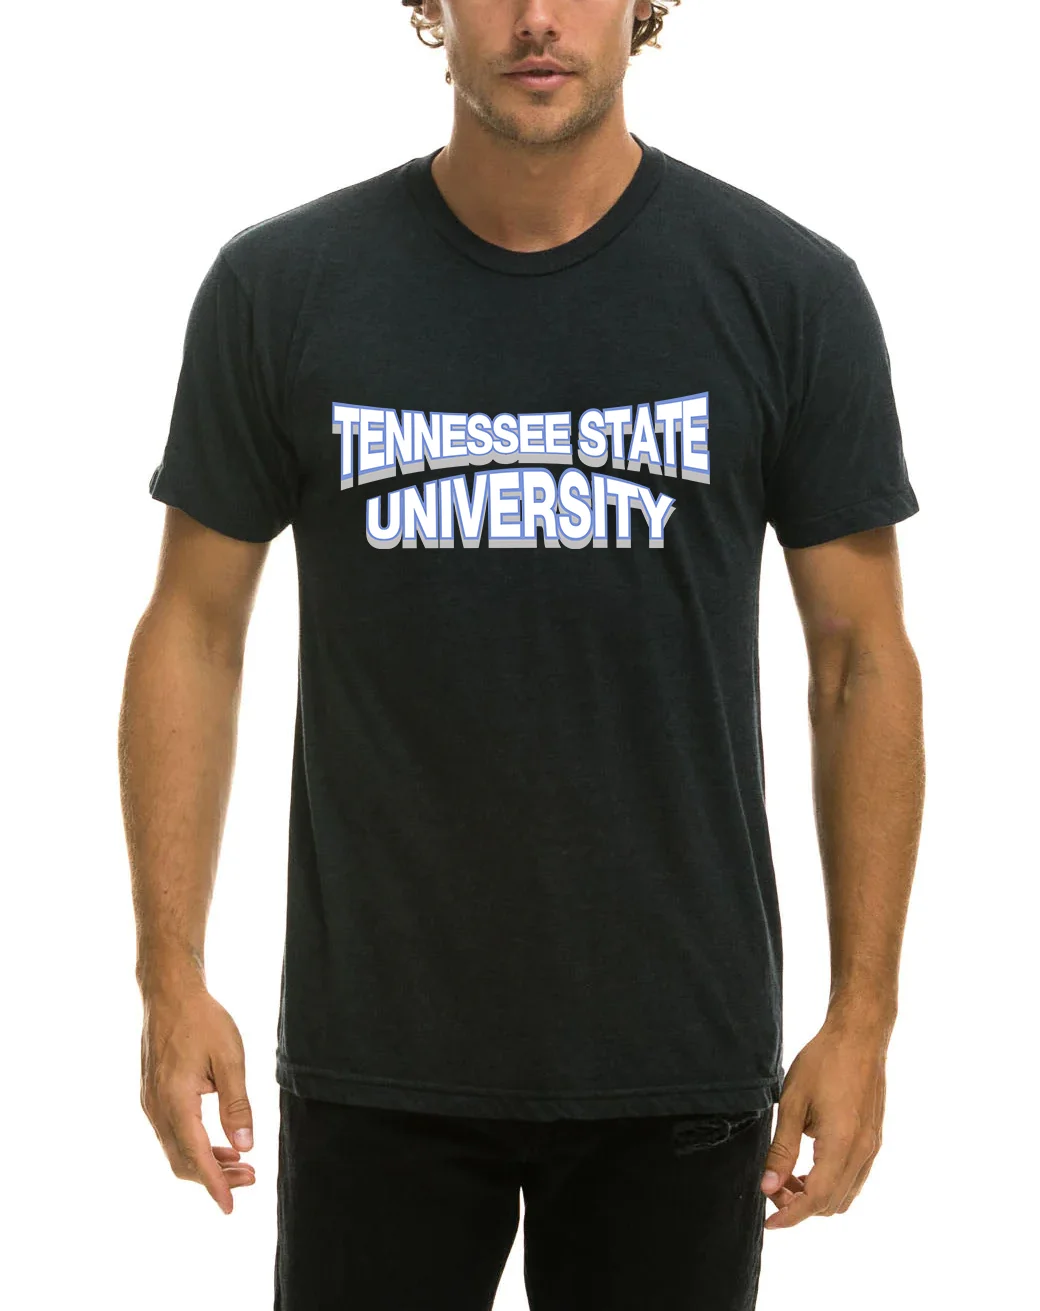 TENNESSEE STATE UNIVERSITY T-SHIRT